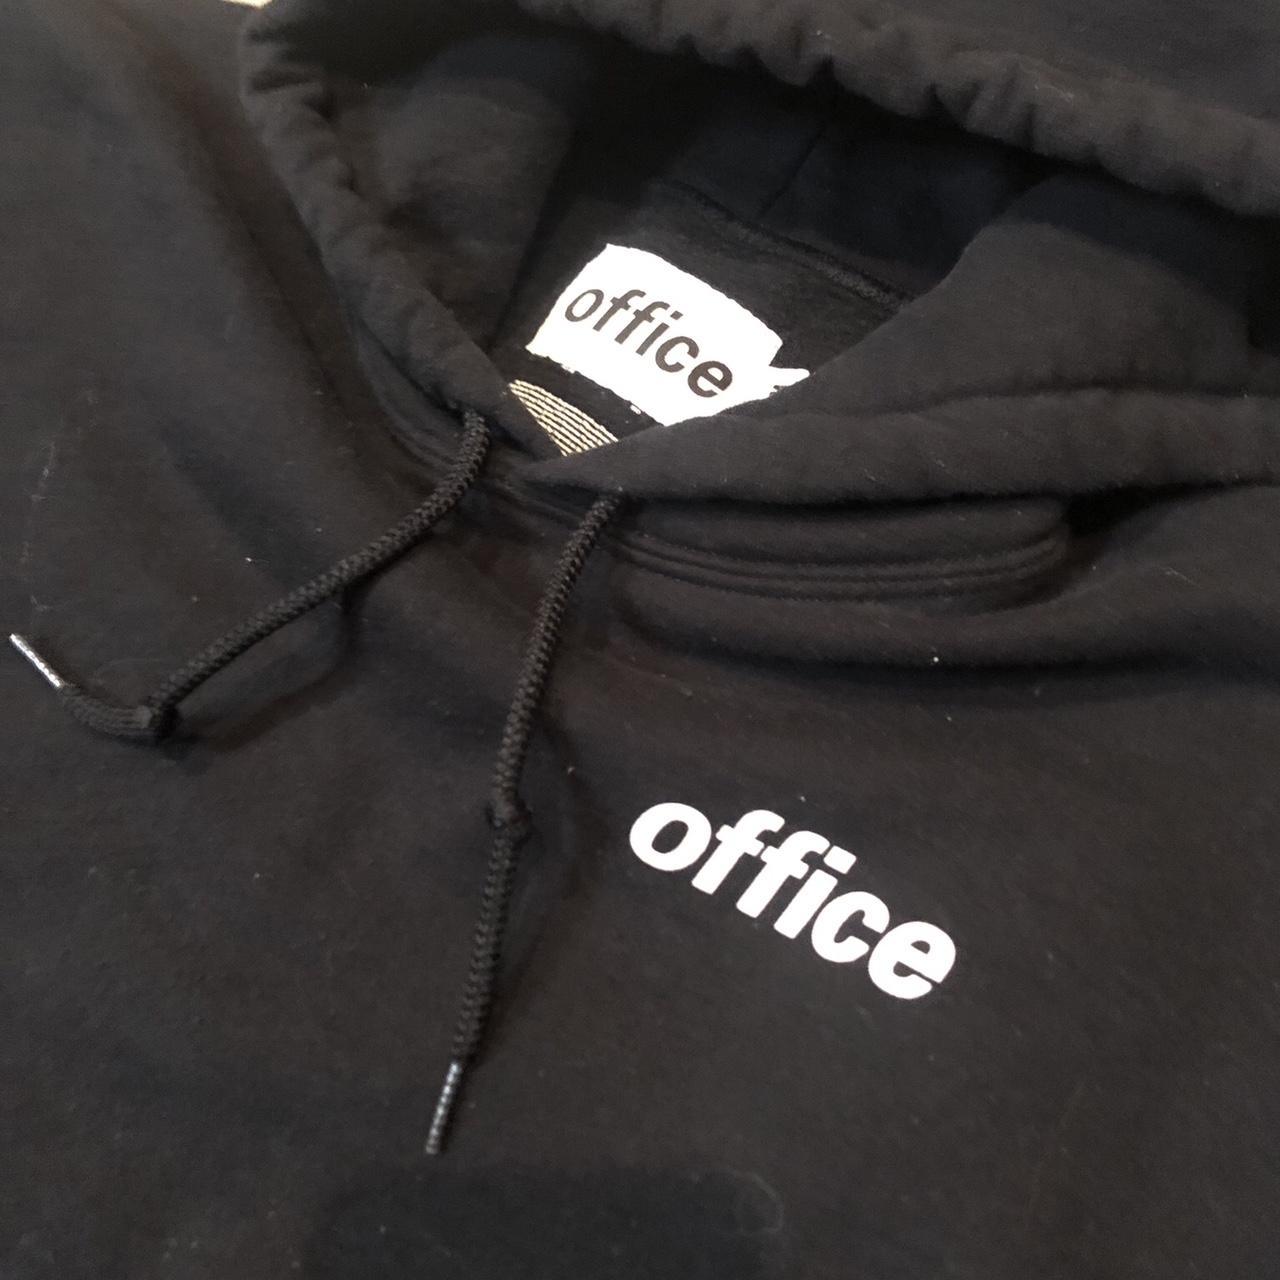 Product Image 2 - Office Hoodie 📞

Size M

#office #hoodie